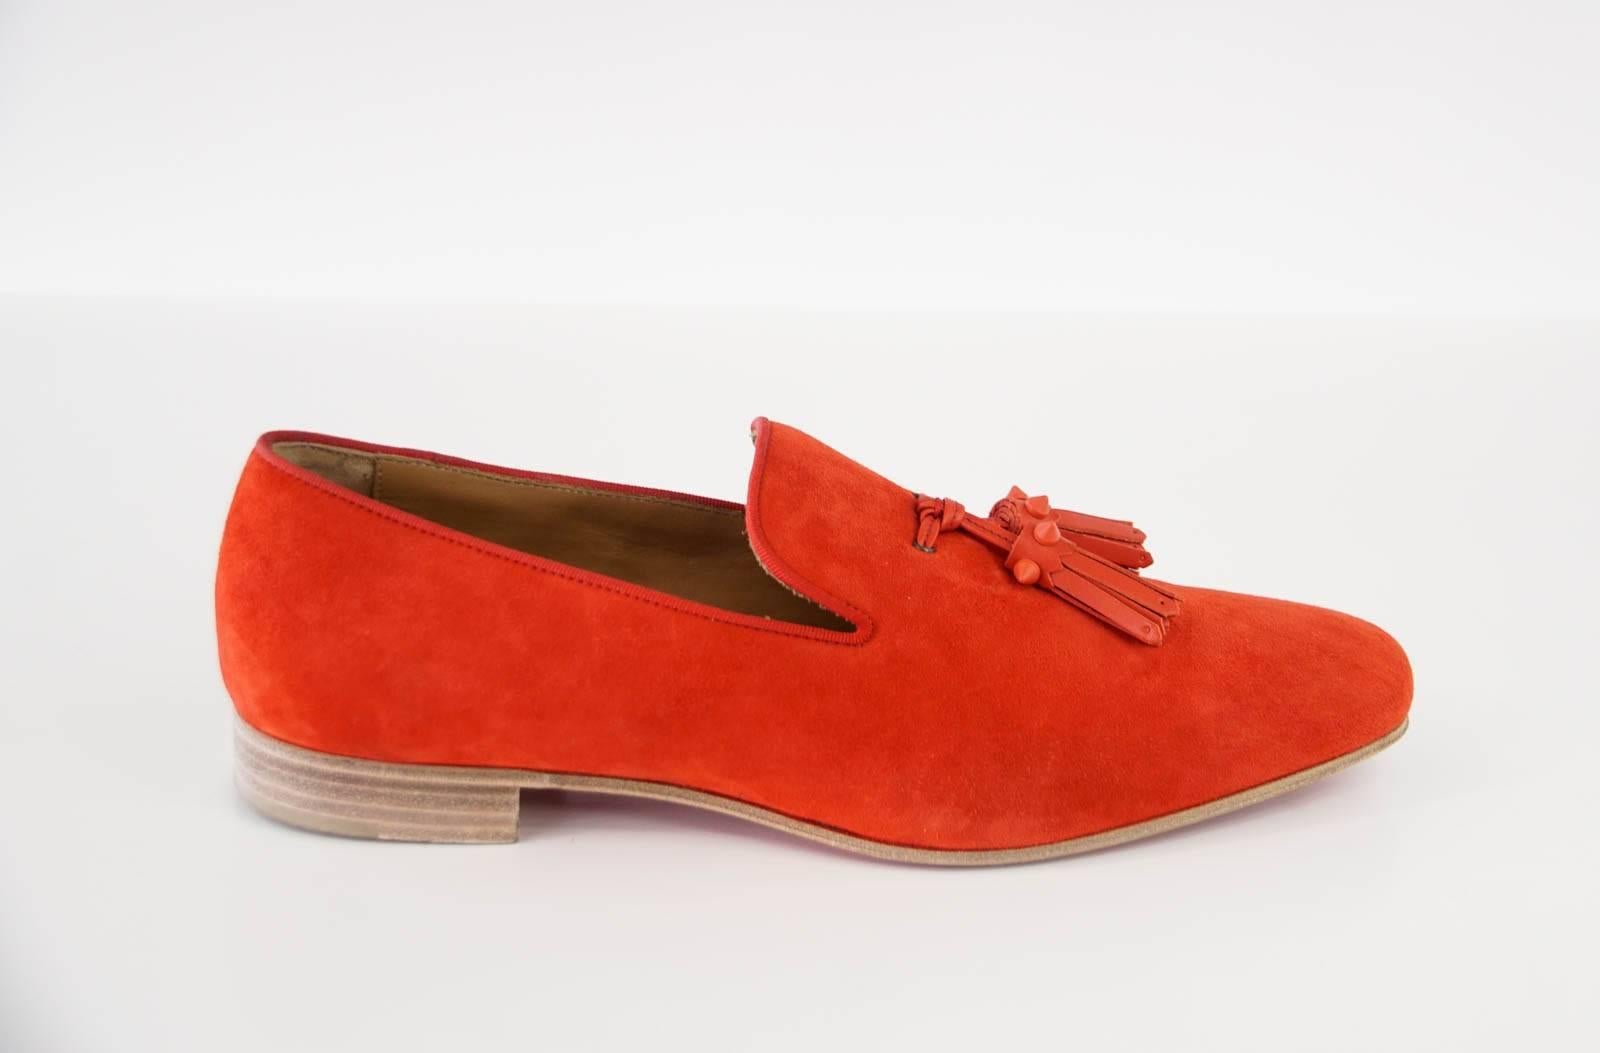 Guaranteed authentic Christian Louboutin very beautiful red suede loafer. 
Men's soft toned red loafer with leather tassles.
Tassels are accentuated with signature red spikes.
Comes with box and sleeper.
final sale

SIZE 42
USA SIZE